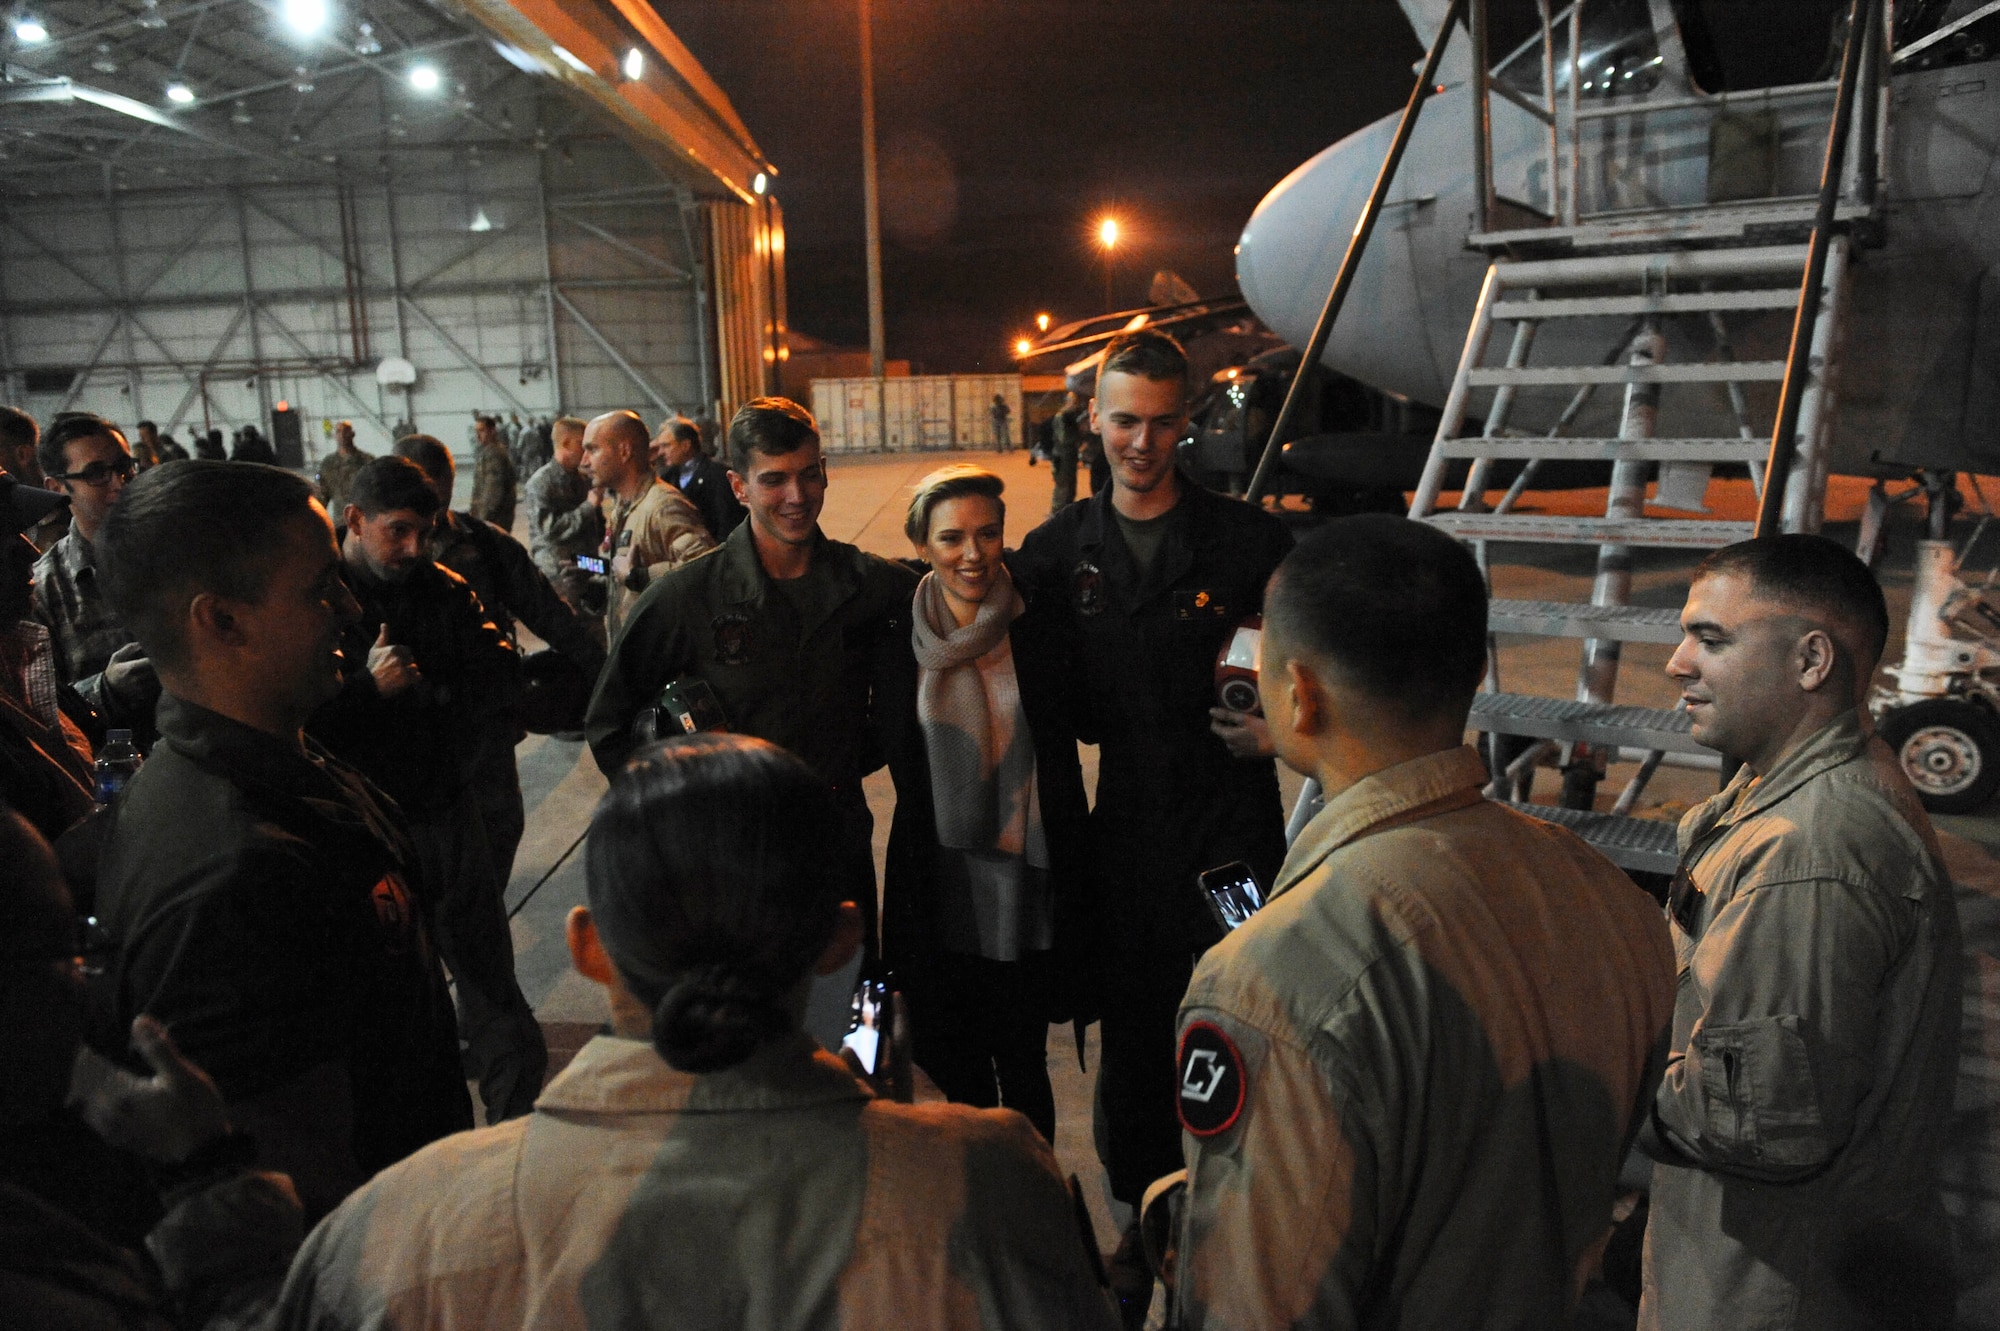 Actress Scarlett Johansson stands with U.S. service members for a photo Dec. 5, 2016, at Incirlik Air Base, Turkey. This trip was Johansson’s first time on a USO Holiday Visit, a tradition that goes back to former chairman of the Joint Chiefs of Staff, U.S. Air Force Gen. Richard B. Myers in 2003. (U.S. Air Force photo by Airman 1st Class Devin M. Rumbaugh)